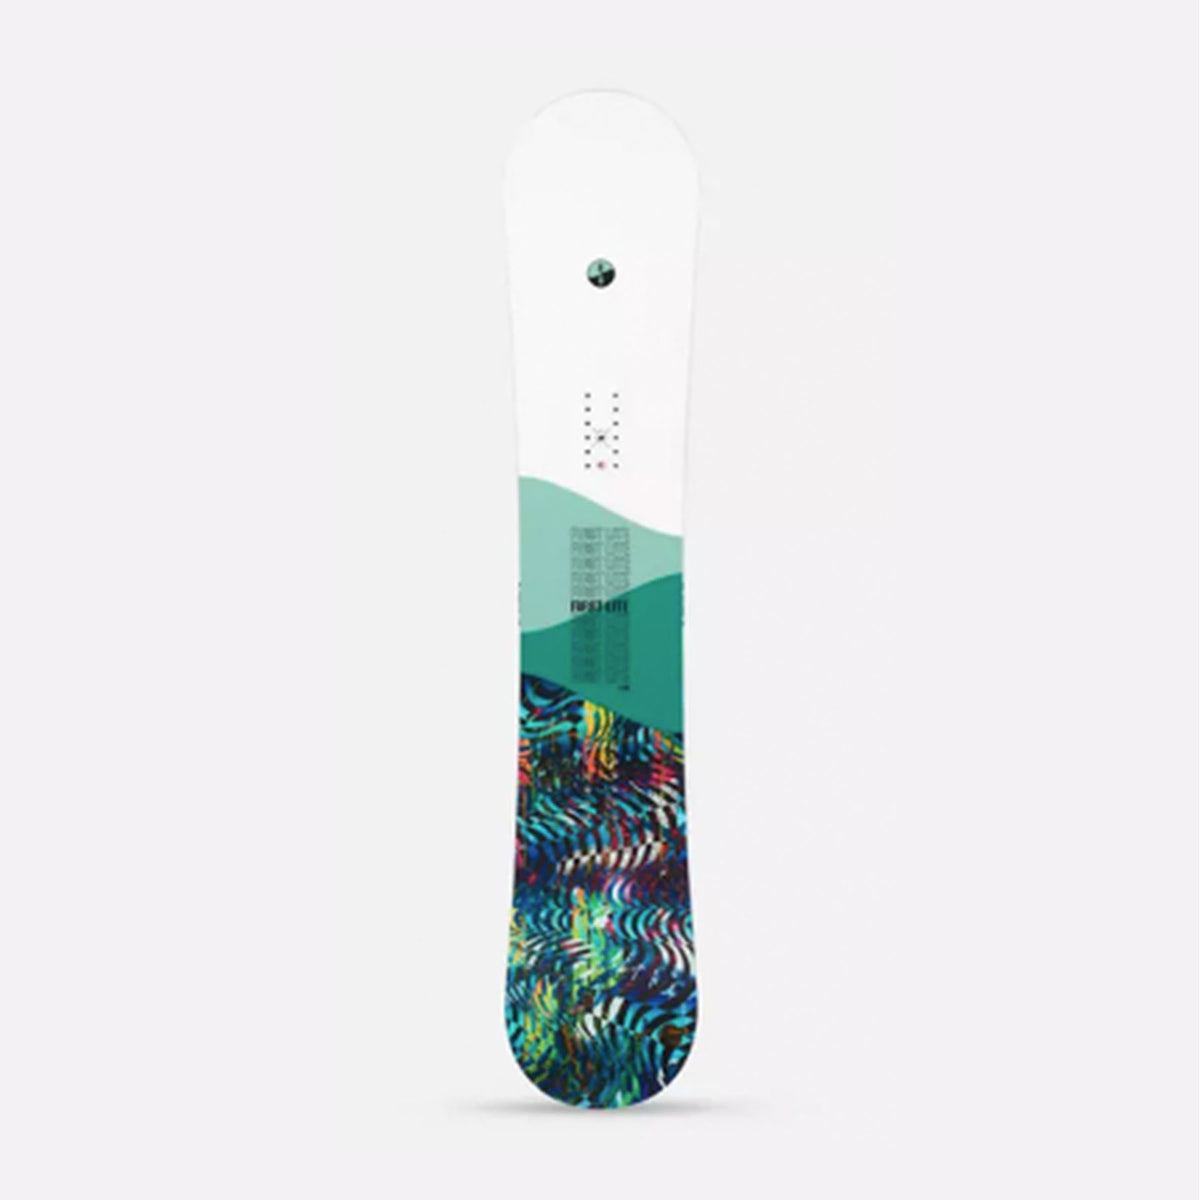 Hero image featuring the top of the Women's K2 First Lite snowboard with a white nose, green mid section, and multi-colored tale.